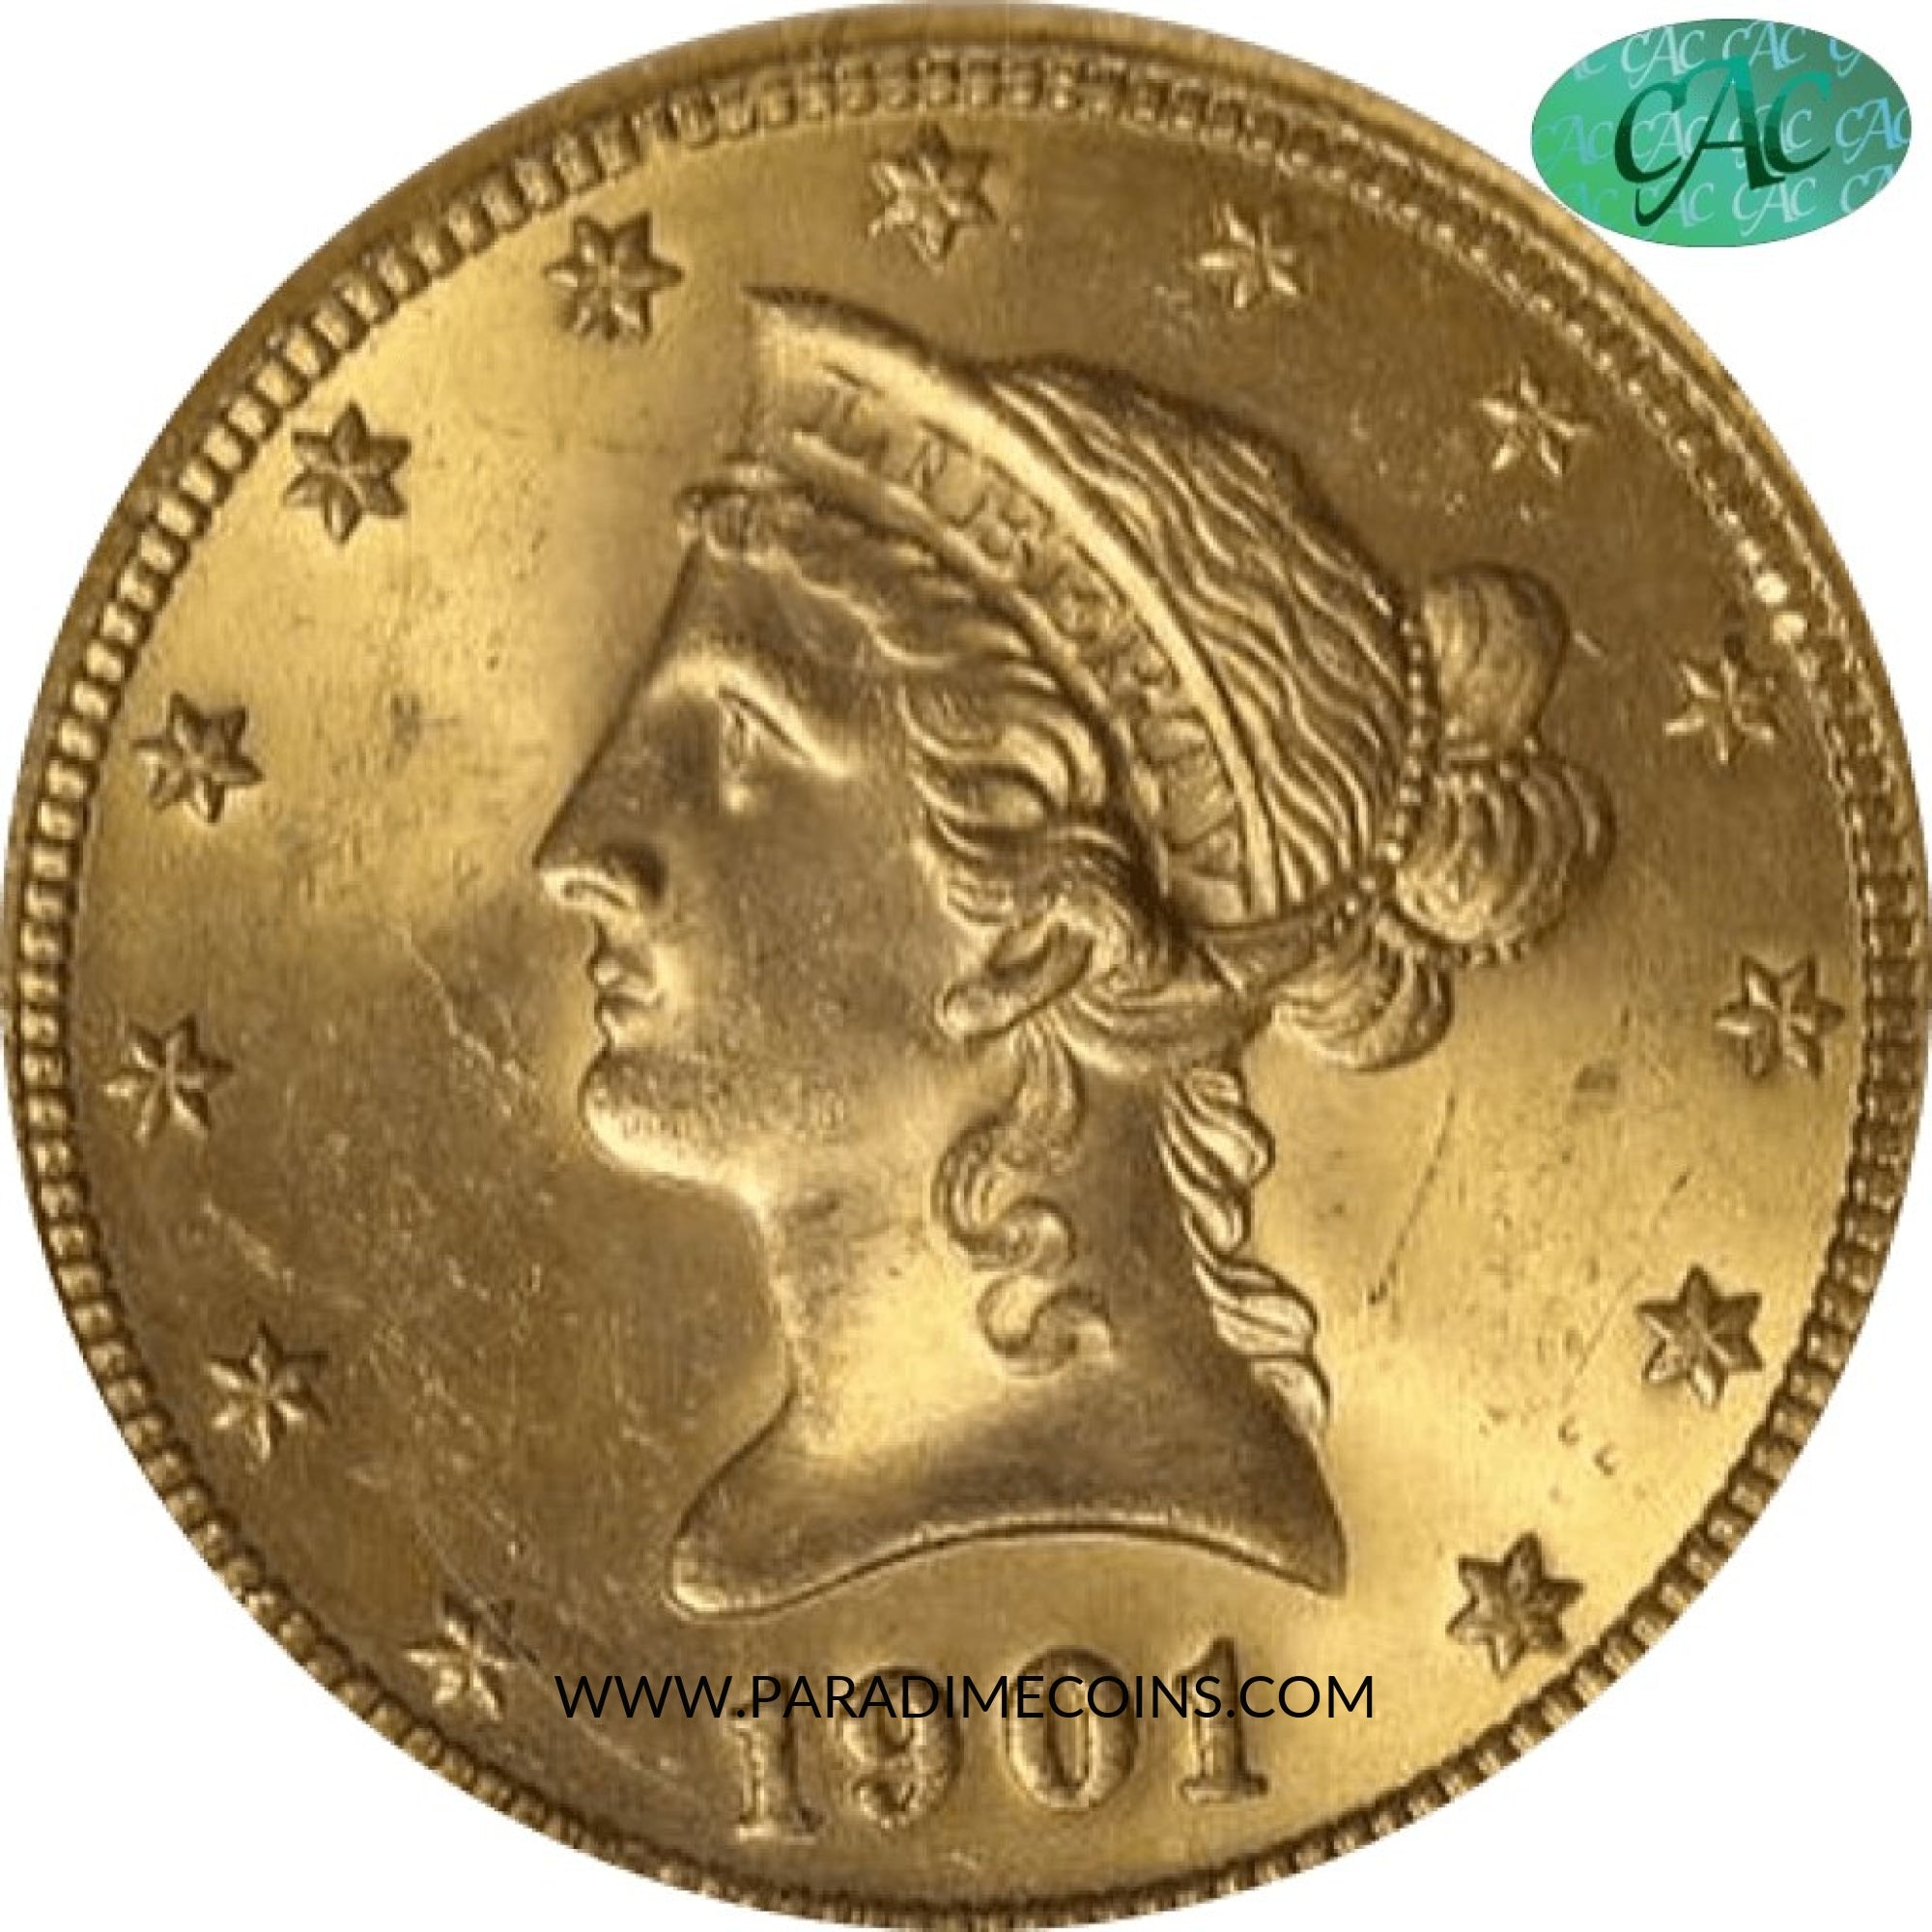 1901-S $10 MS64 NGC CAC - Paradime Coins | PCGS NGC CACG CAC Rare US Numismatic Coins For Sale